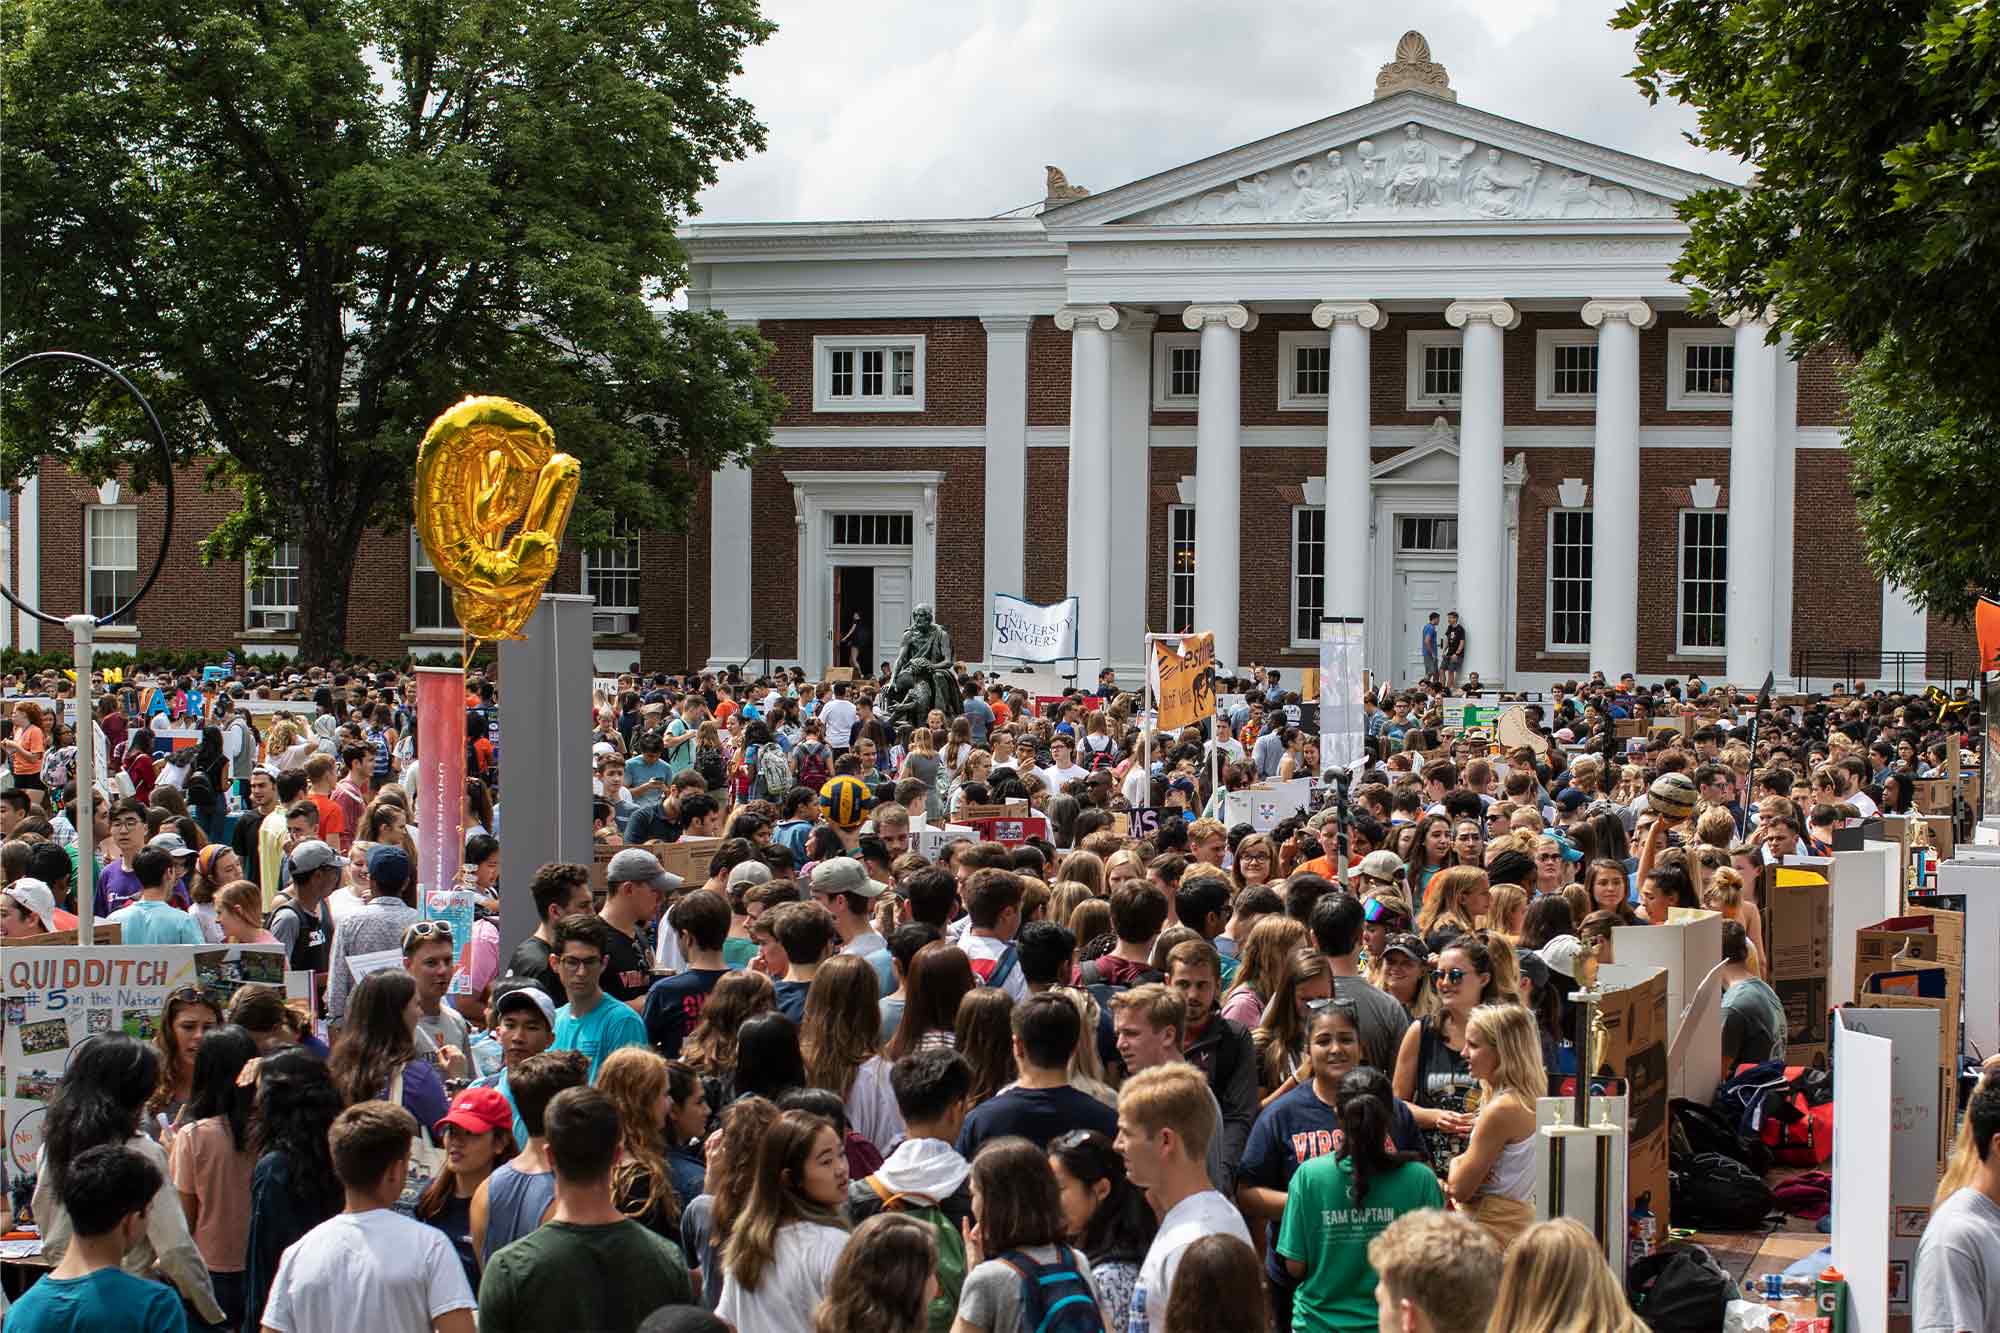 A large crowd of people fills the UVA Lawn in front of Old Cabell Hall